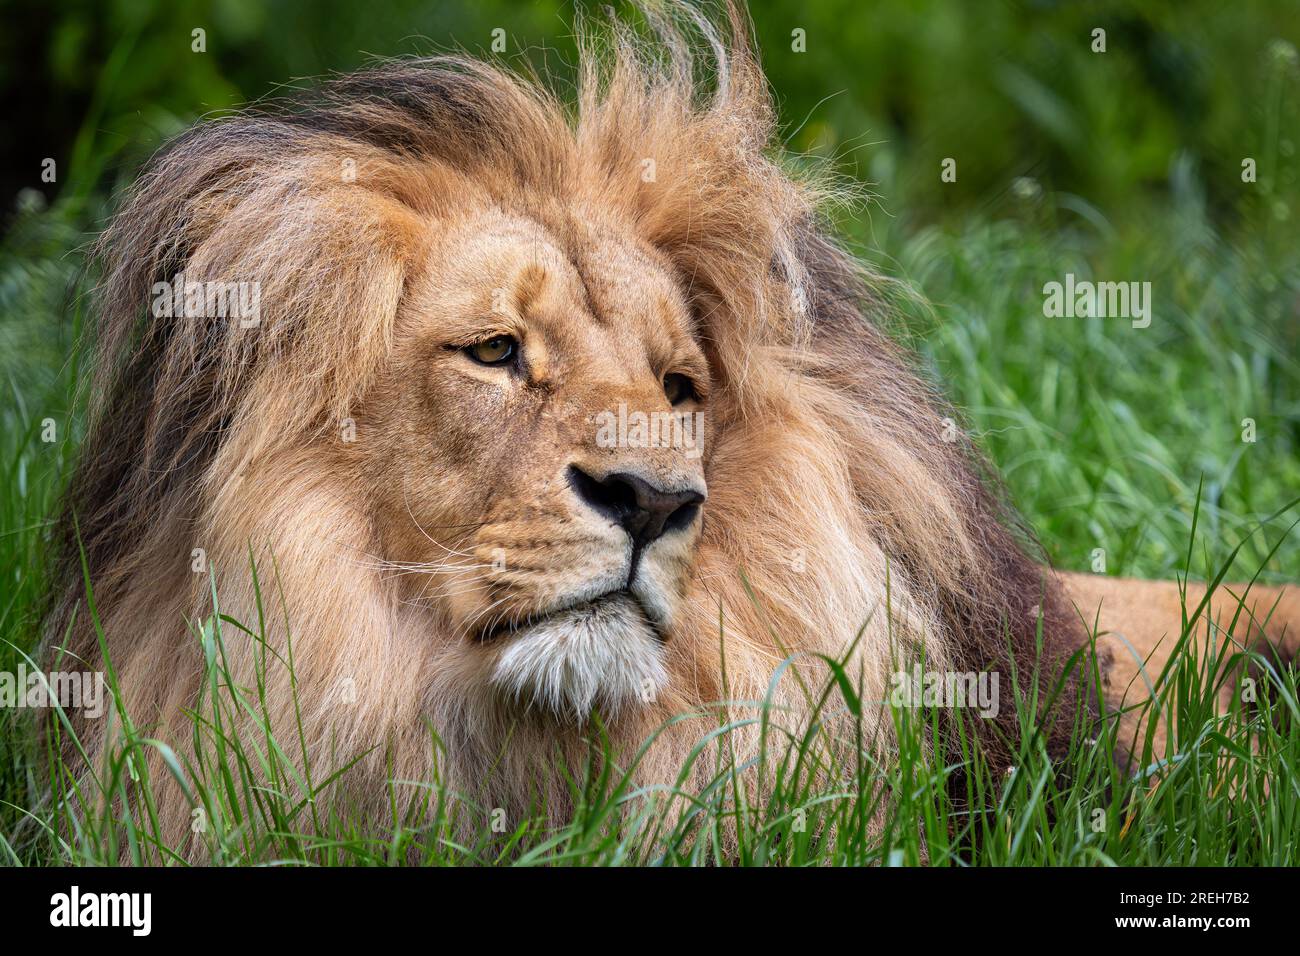 Katanga Lion or Southwest African Lion, panthera leo bleyenberghi. African lion in the grass. Stock Photo